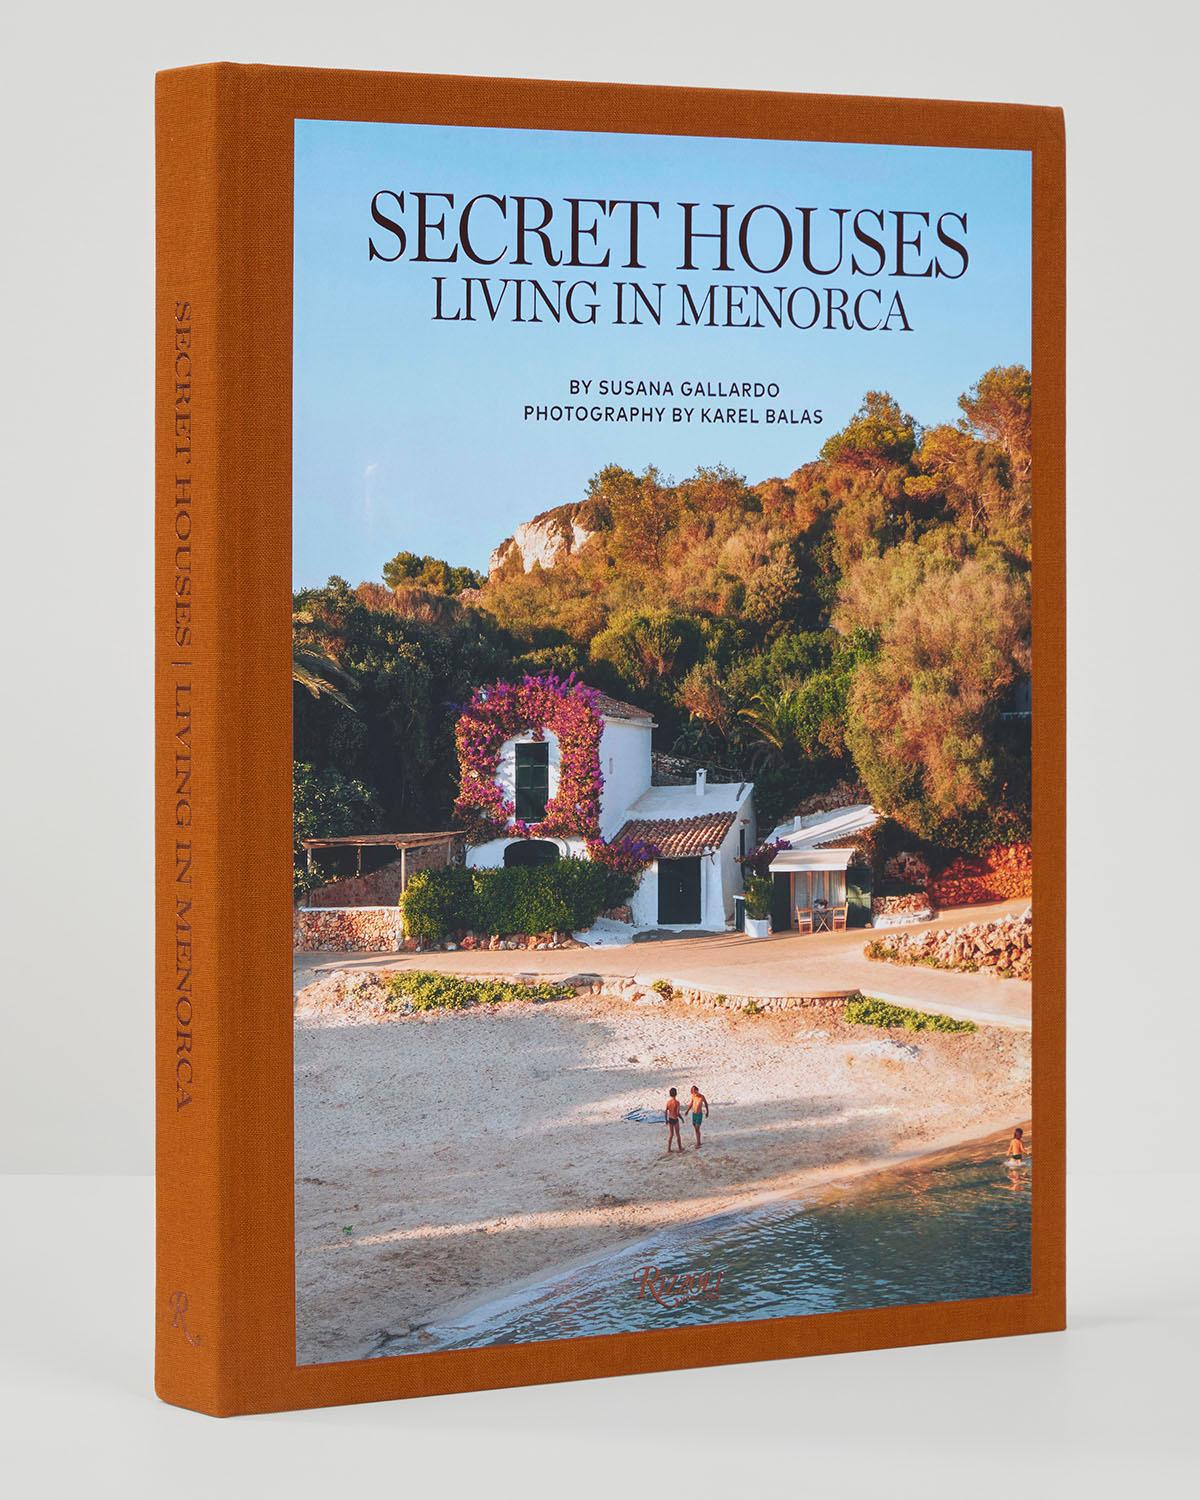 Secret Houses: Living in Menorca
Text by Susana Gallardo, Photographs by Karel Balas

Dreamy estates from the island of Menorca come alive in this lively collection of images presented by Spanish tastemaker Susana Gallardo.

This exquisite